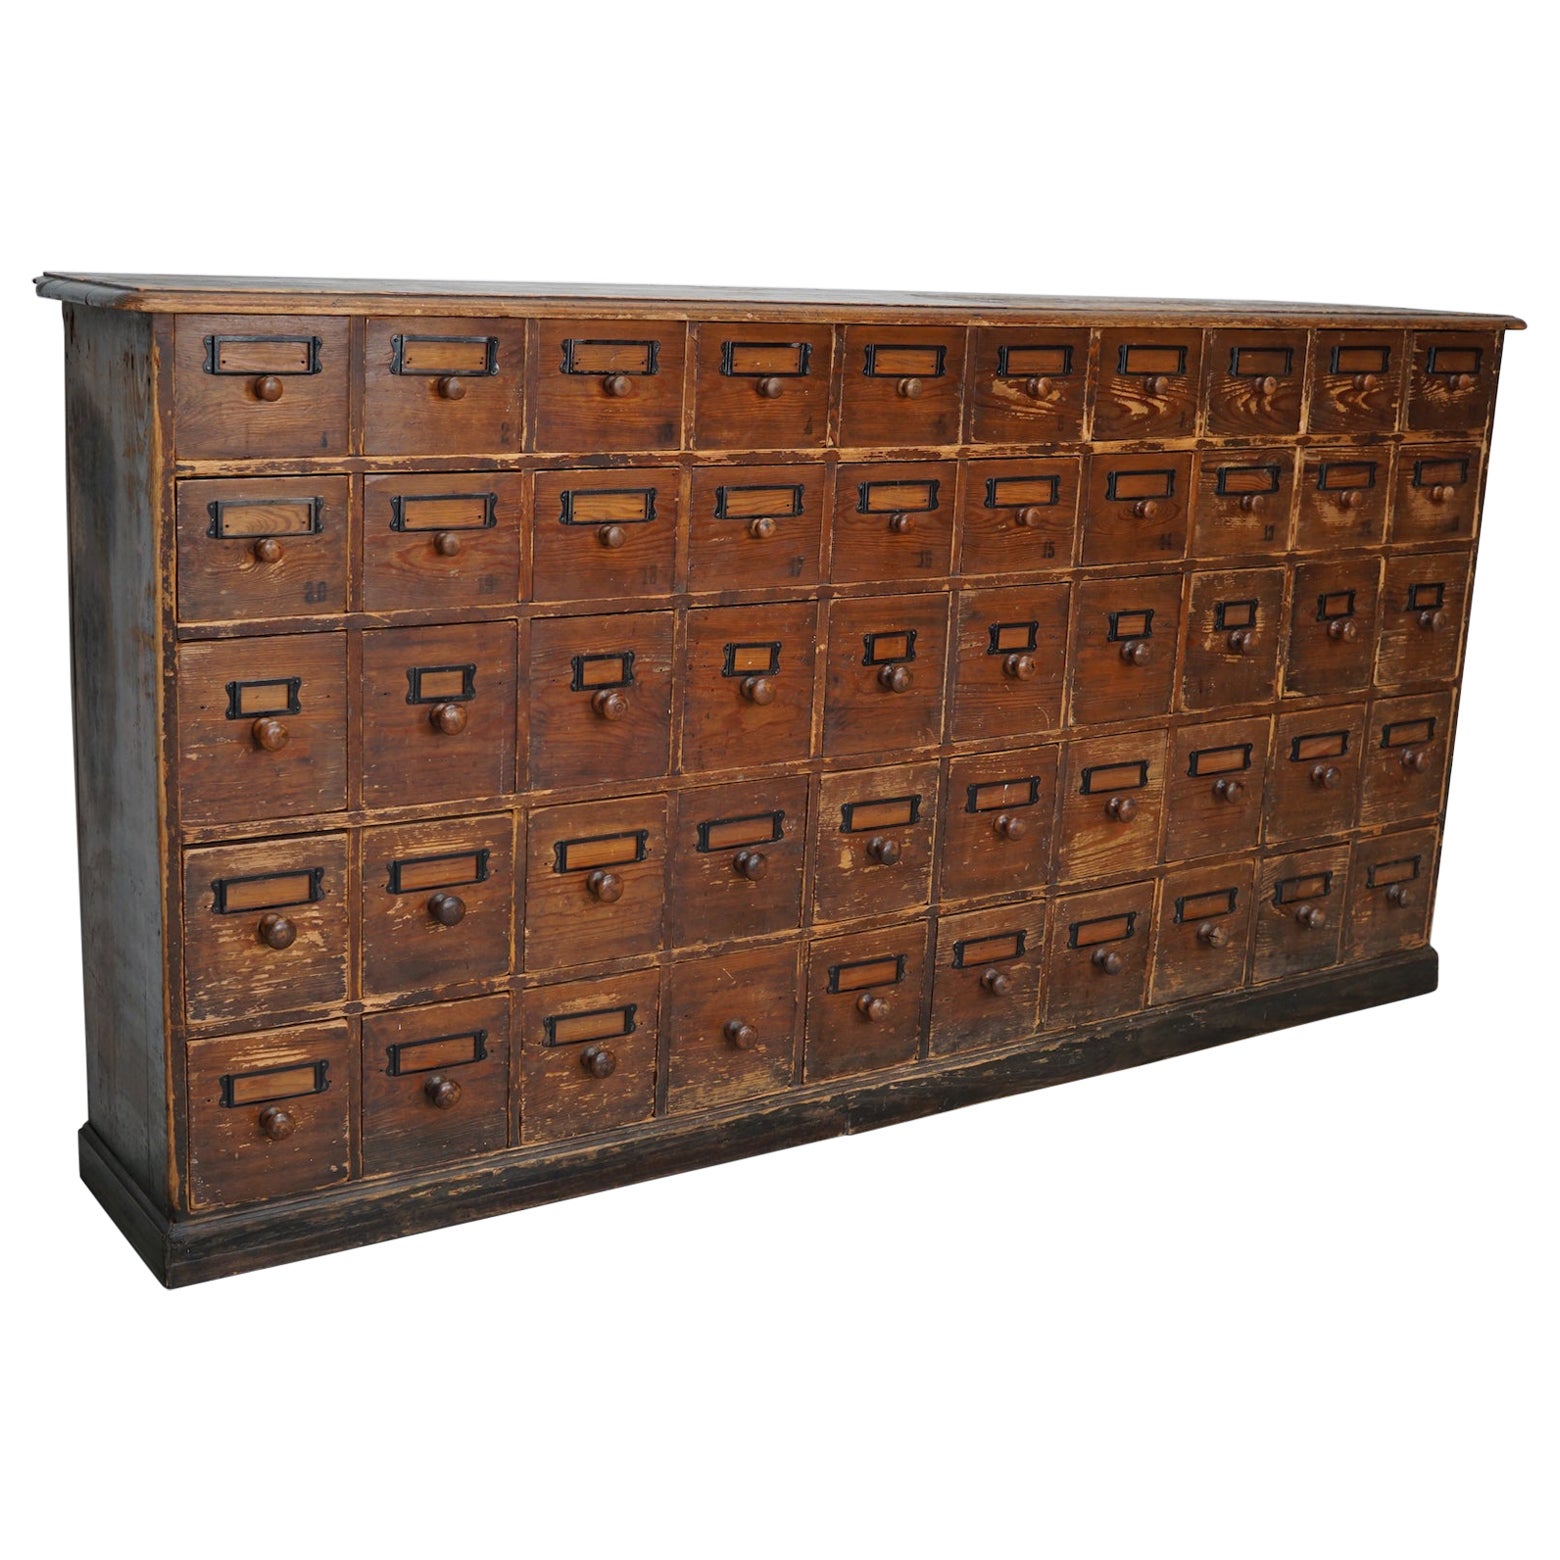 Antique Rustic German Pine Apothecary Cabinet / Bank of Drawers, Early 20thc